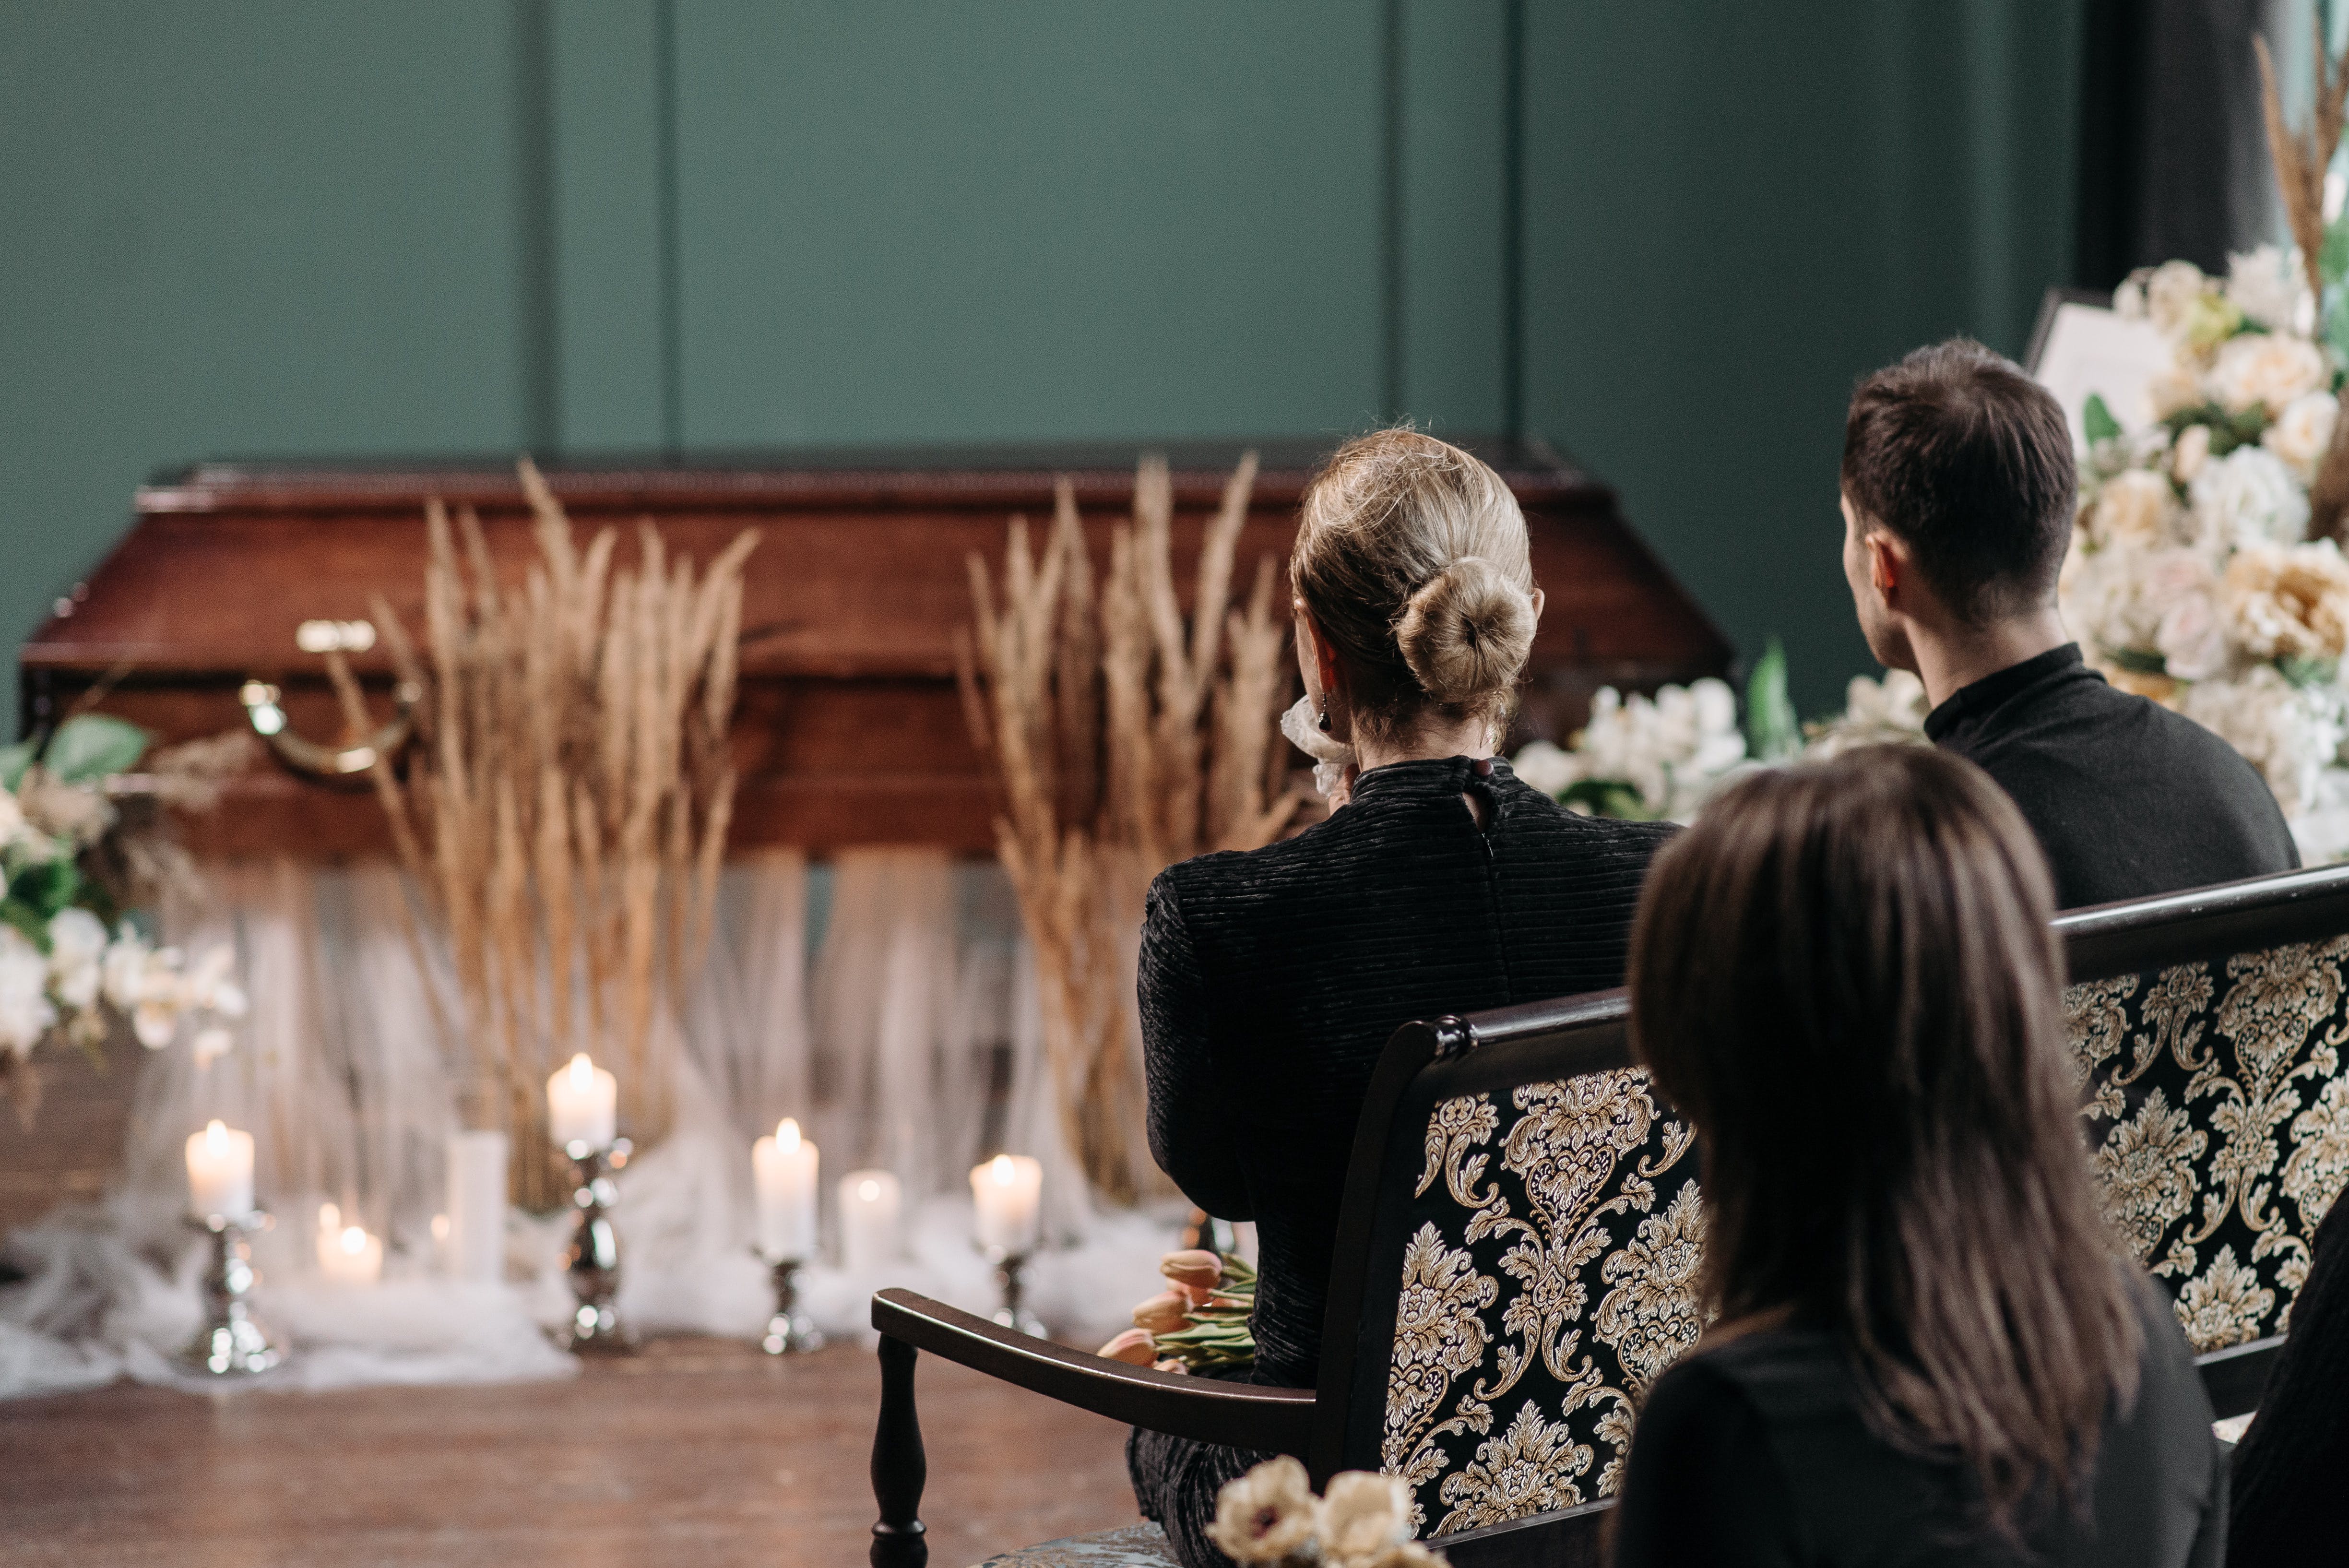 People at a funeral. | Source: Pexels